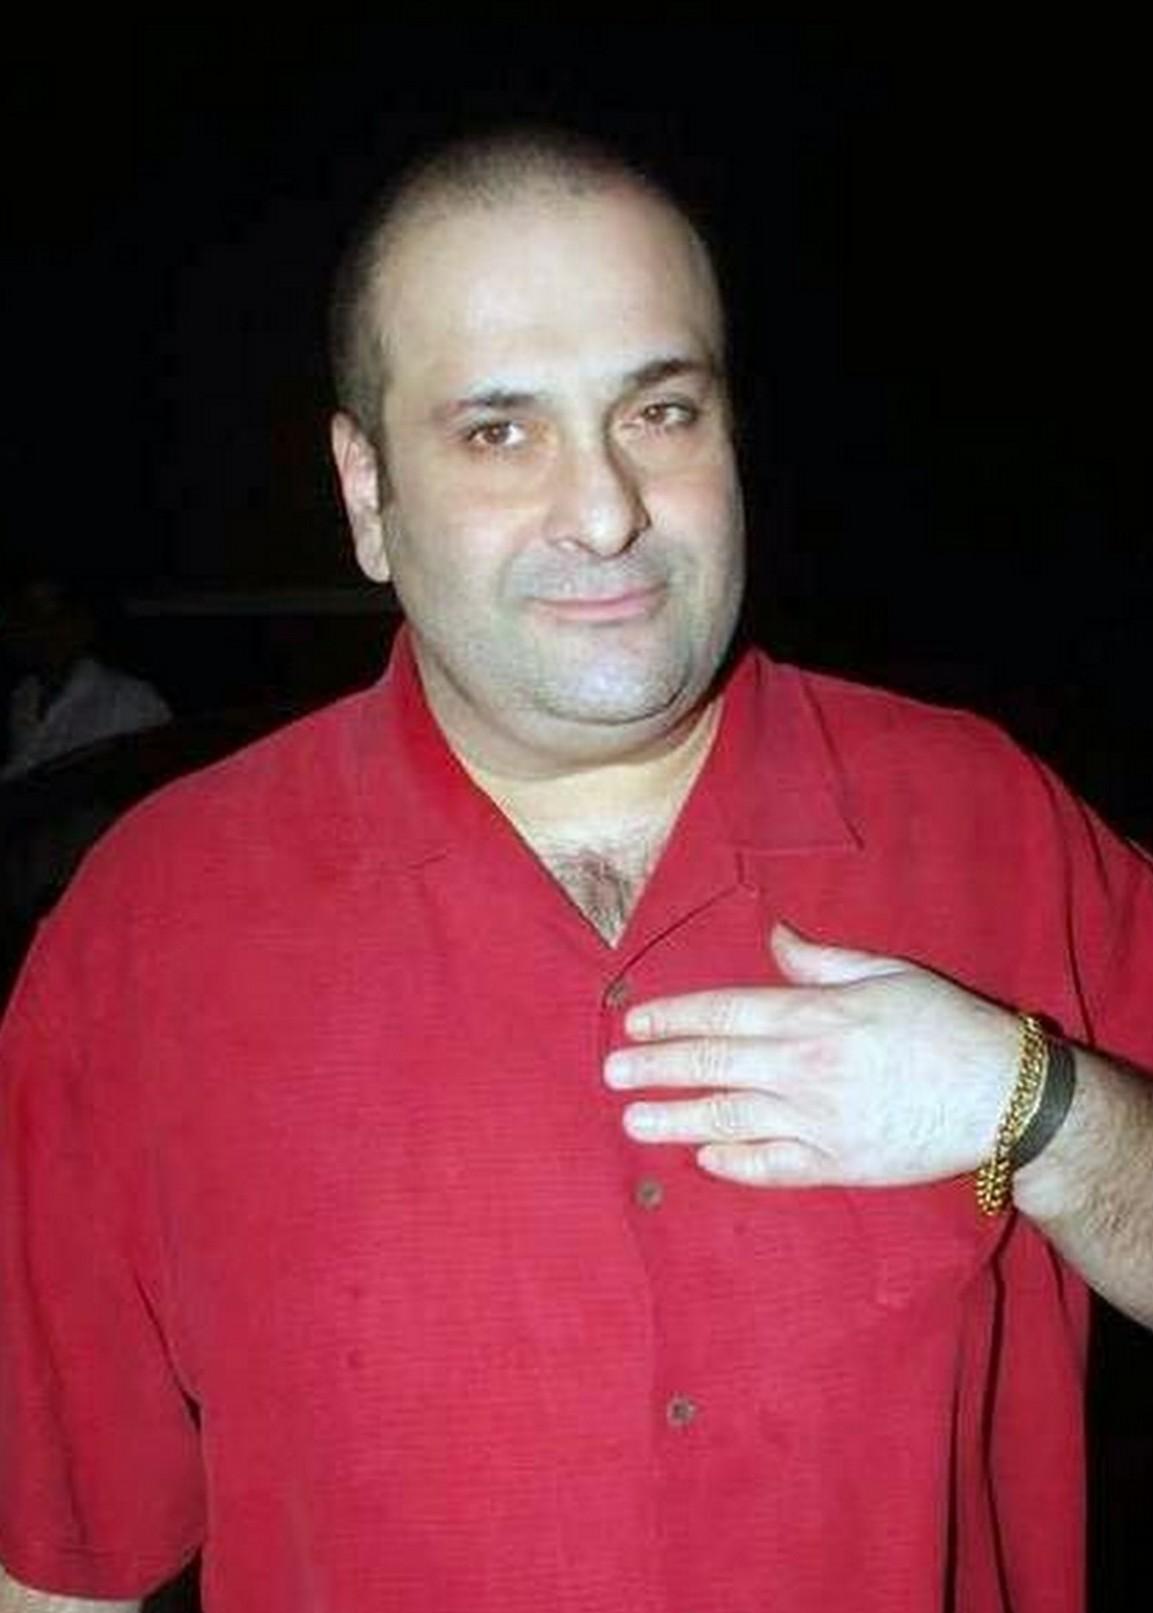 Son of Raj Kapoor, Rajiv Kapoor, is known for his roles in 